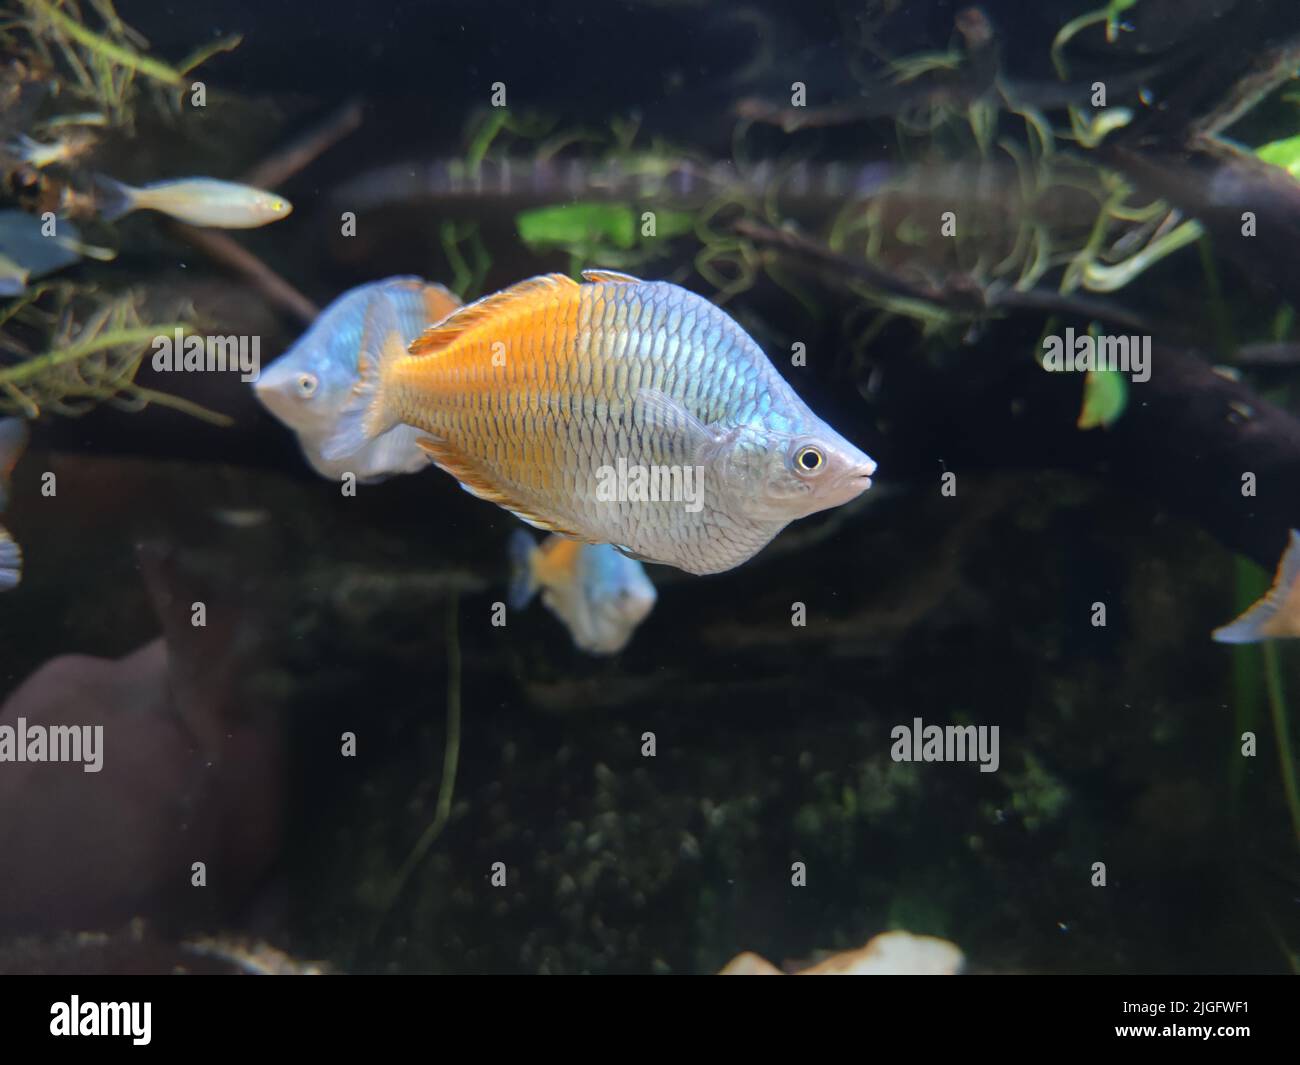 A closeup shot of a Boeseman's rainbowfish swimming in the water Stock Photo